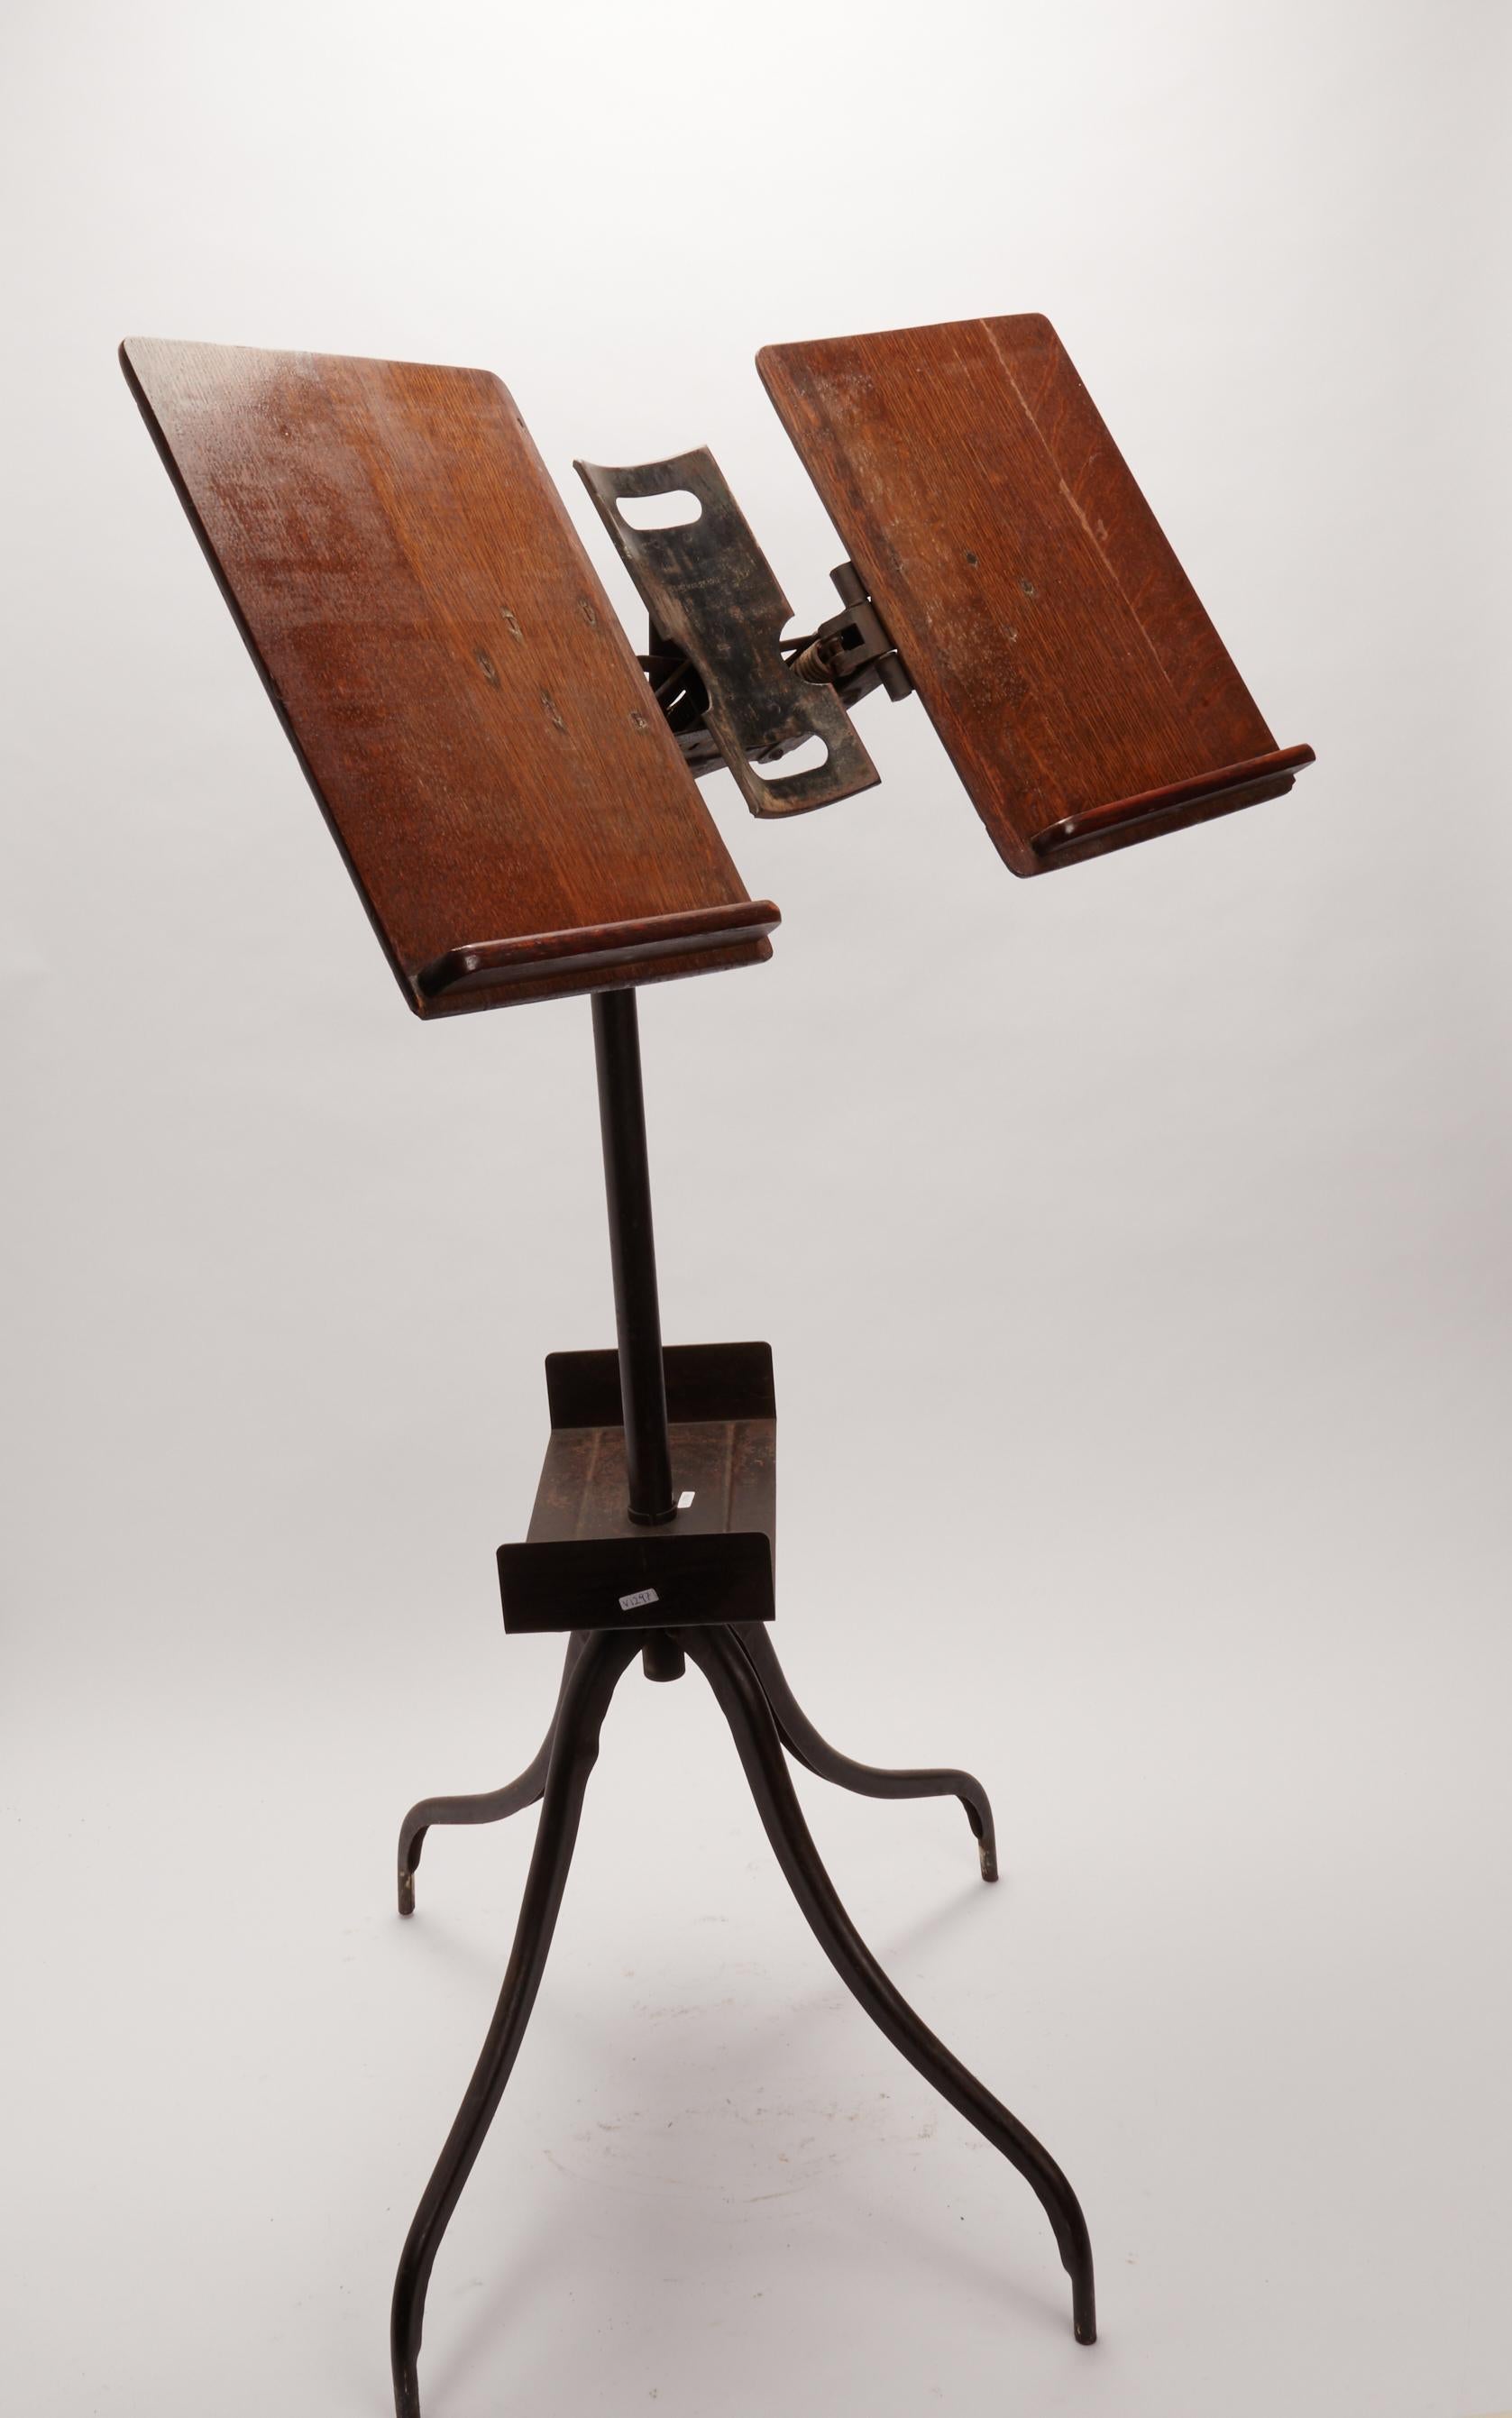 A music score holder, made out of oak wood and iron, with tripod legs. USA 1912 ca.